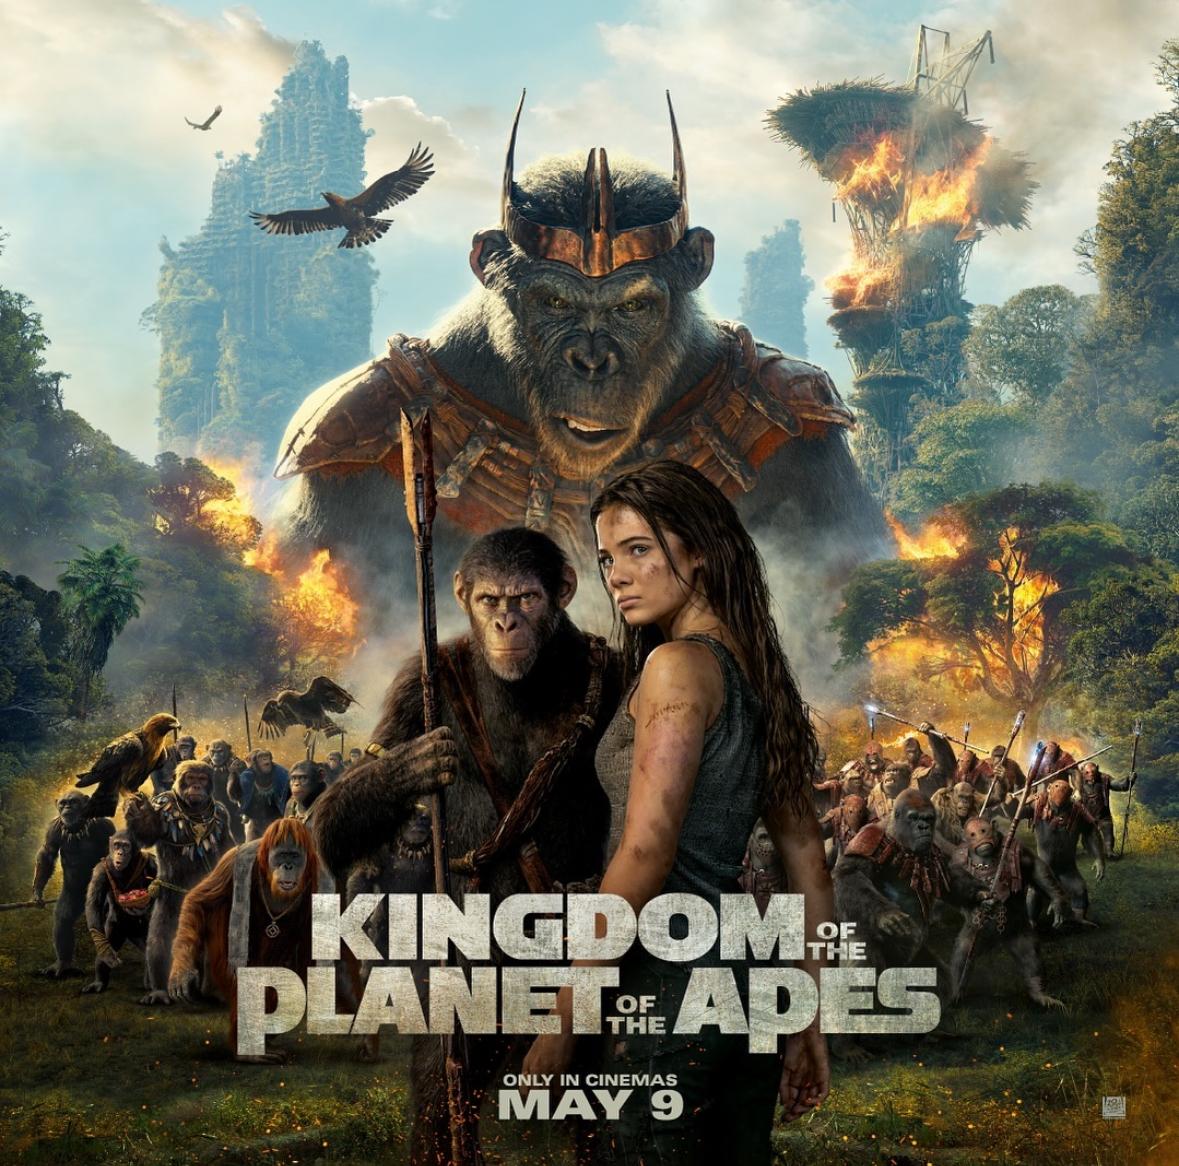 Witness the next step in the evolution of this epic franchise!

Experience Kingdom of the Planet of the Apes at Star Cinemas on May 9, 2024.

Advance bookings are NOW OPEN: starcinemas.ae

#apesmovie #kingdomoftheplanetoftheapes #planetoftheapes #togetherstrong